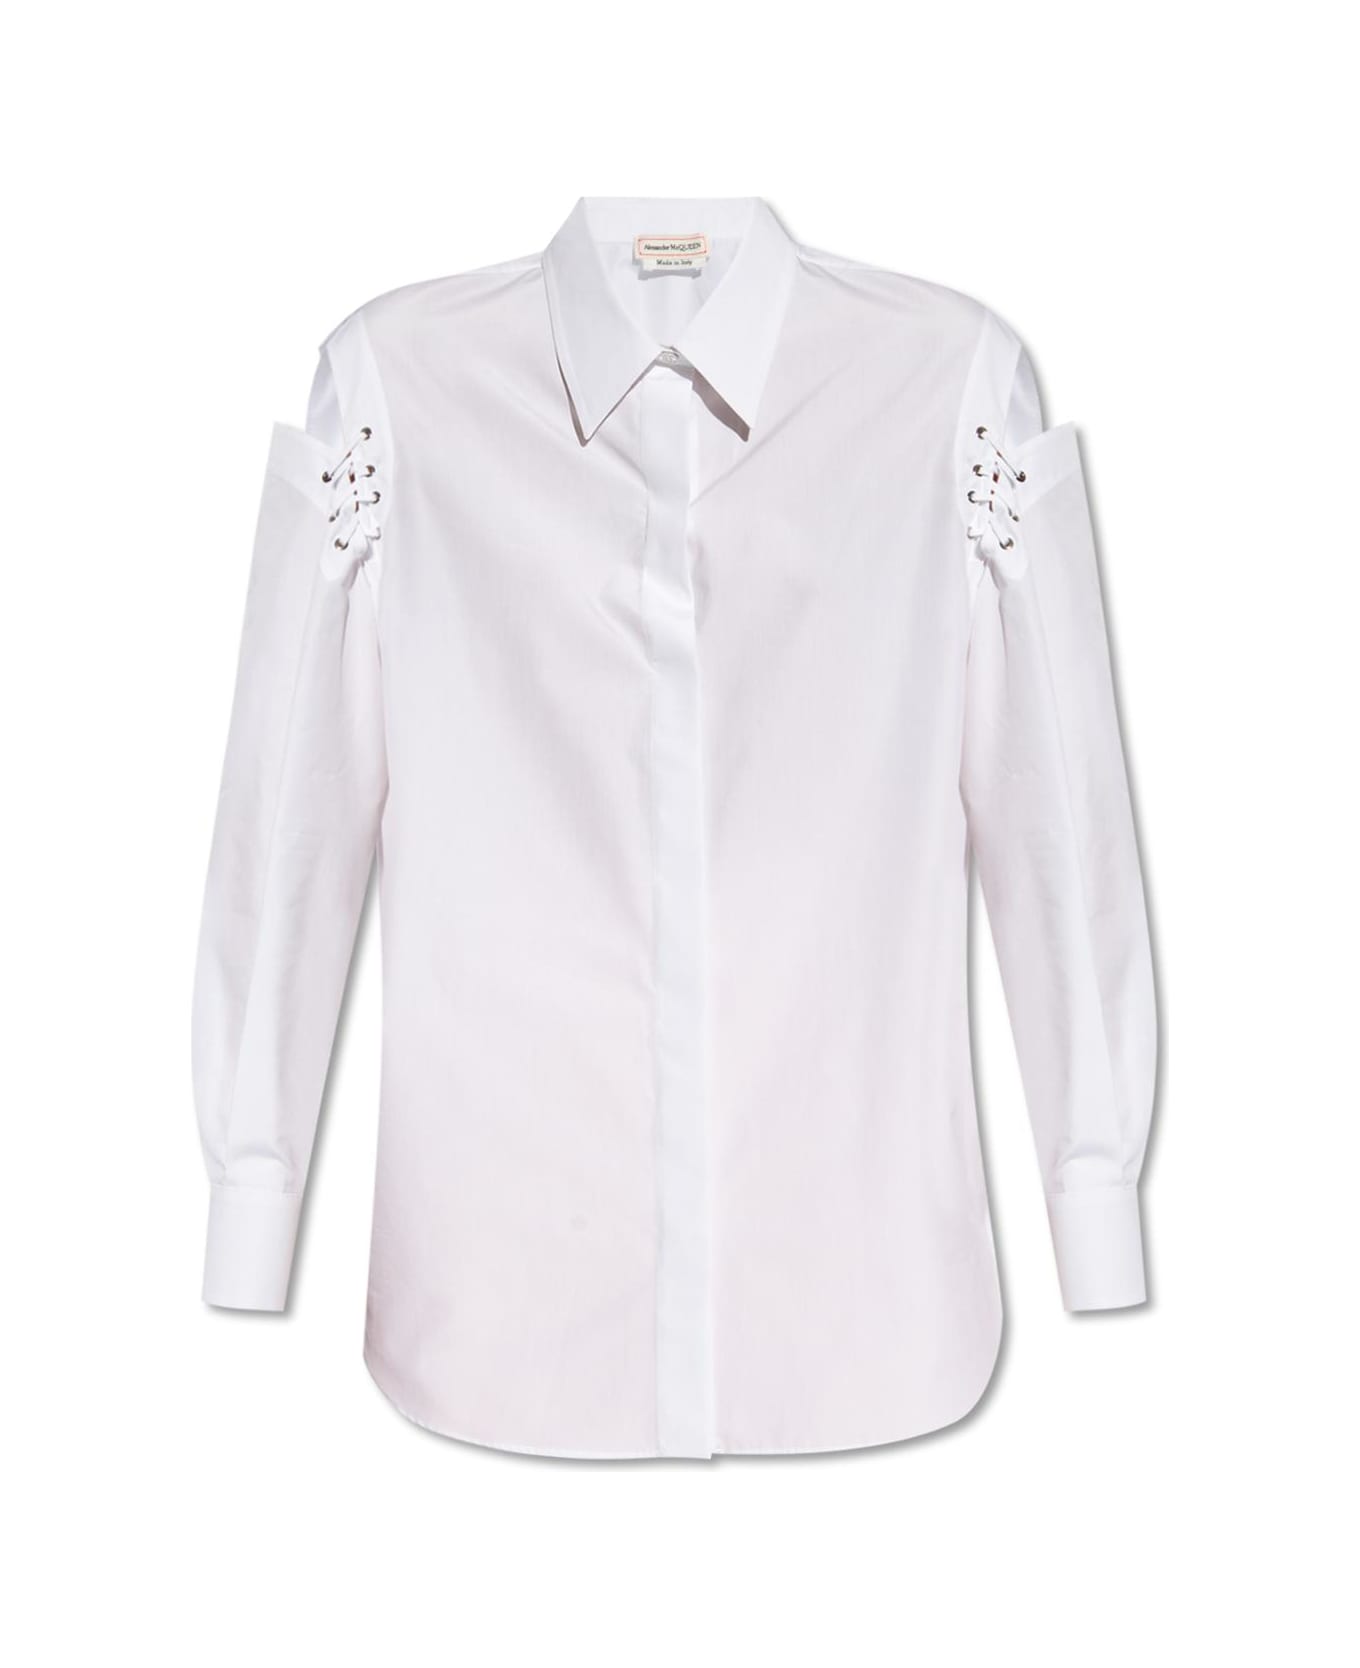 Alexander McQueen Shirt With Cutouts - WHITE シャツ